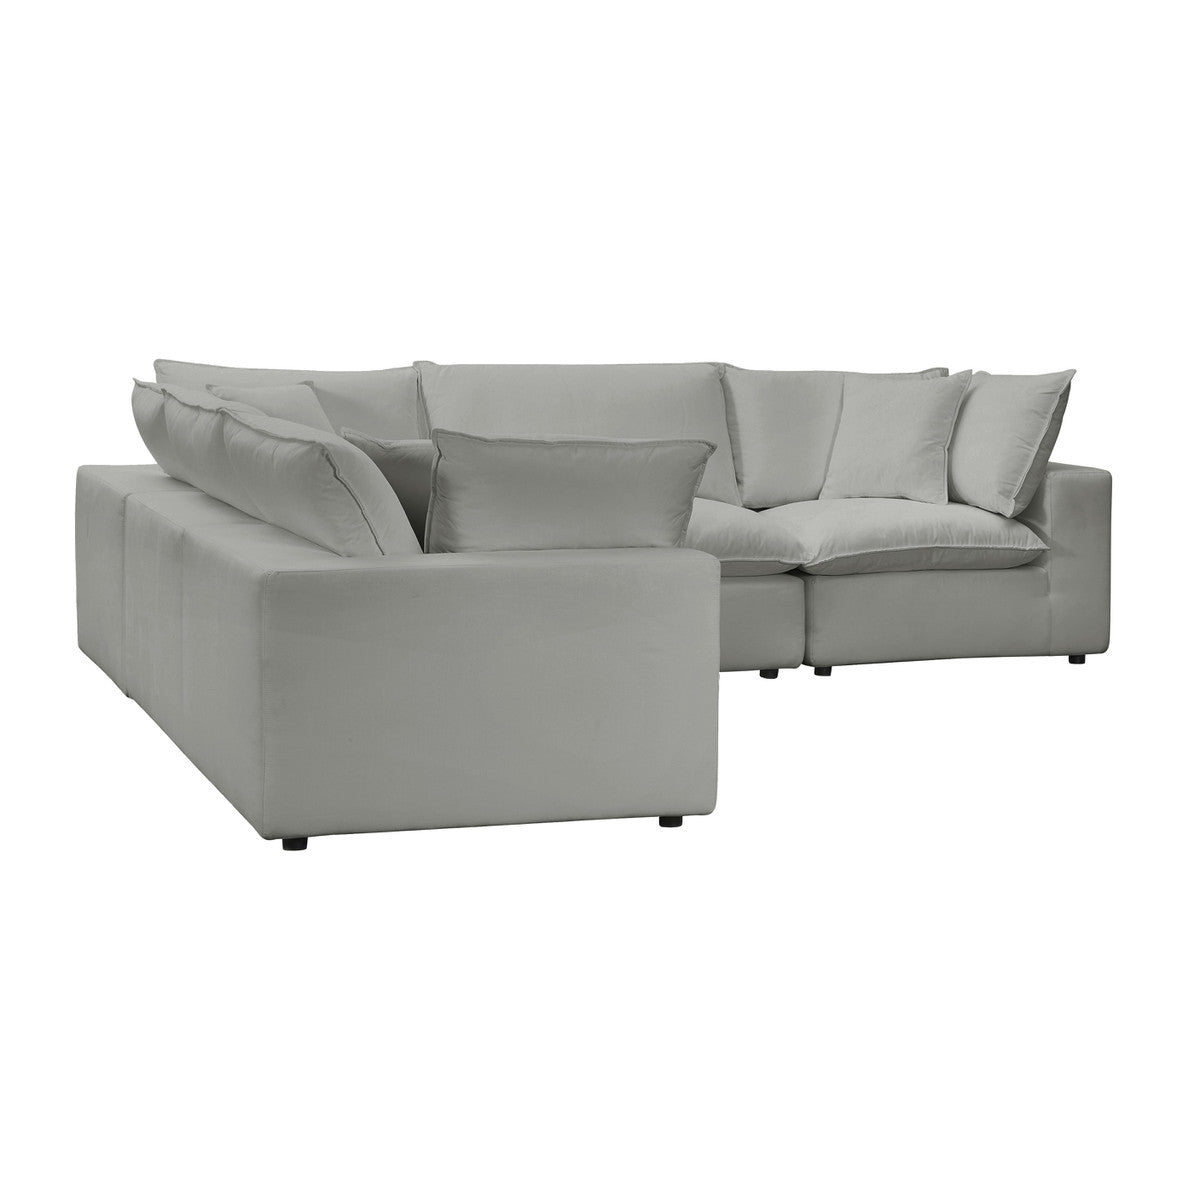 Carlie Slate Modular L-Sectional Sofa - Luxury Living Collection